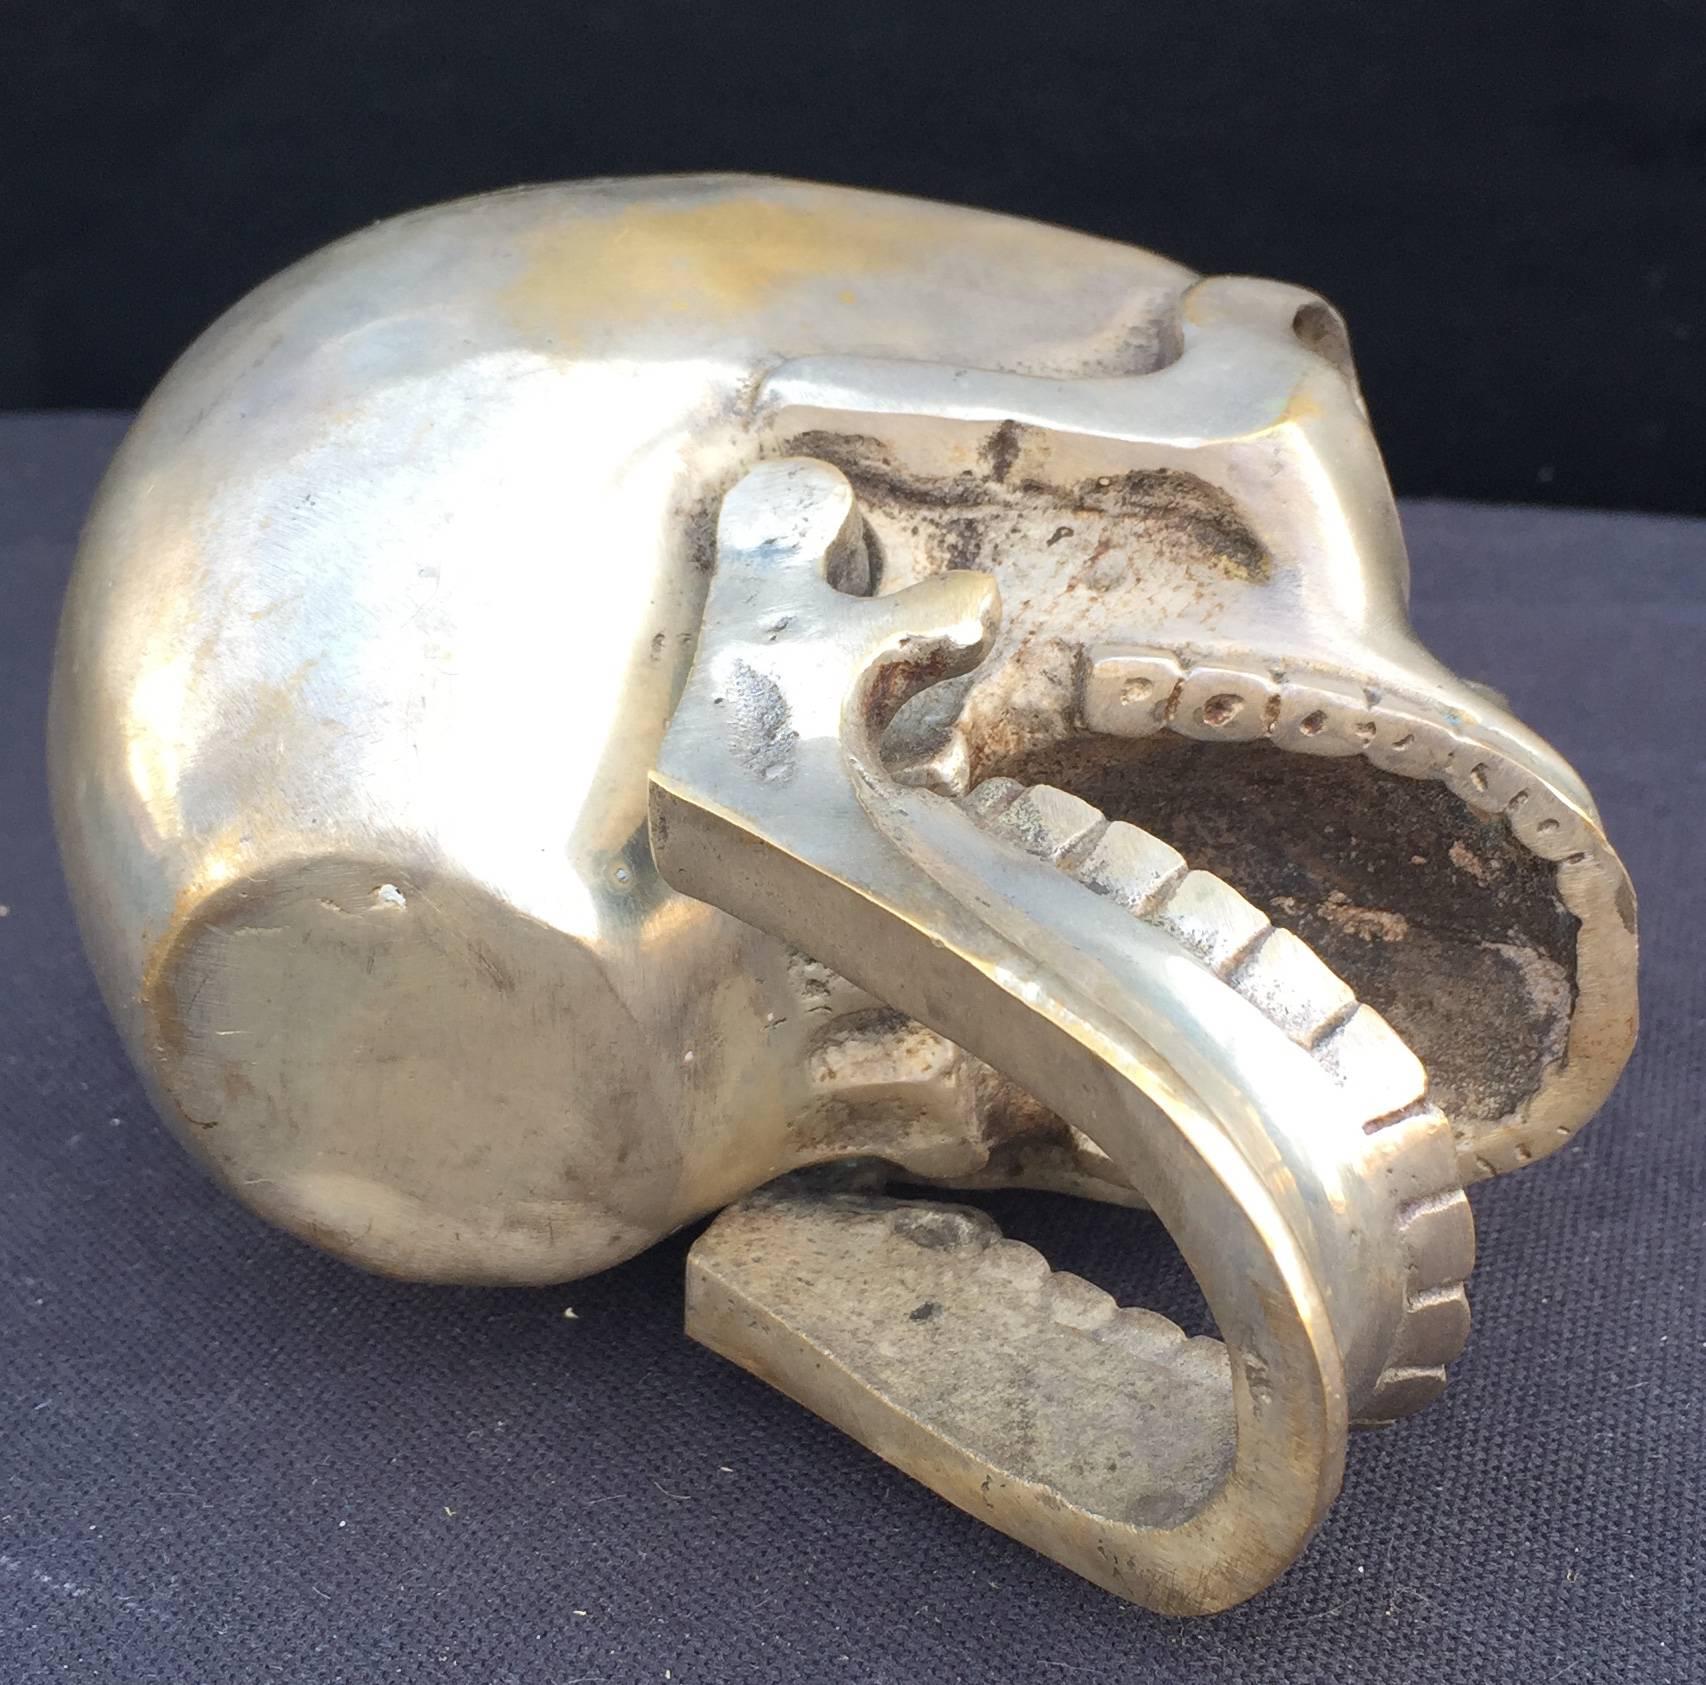 American Nickel over Brass Skull Sculpture with Hinged Mandible